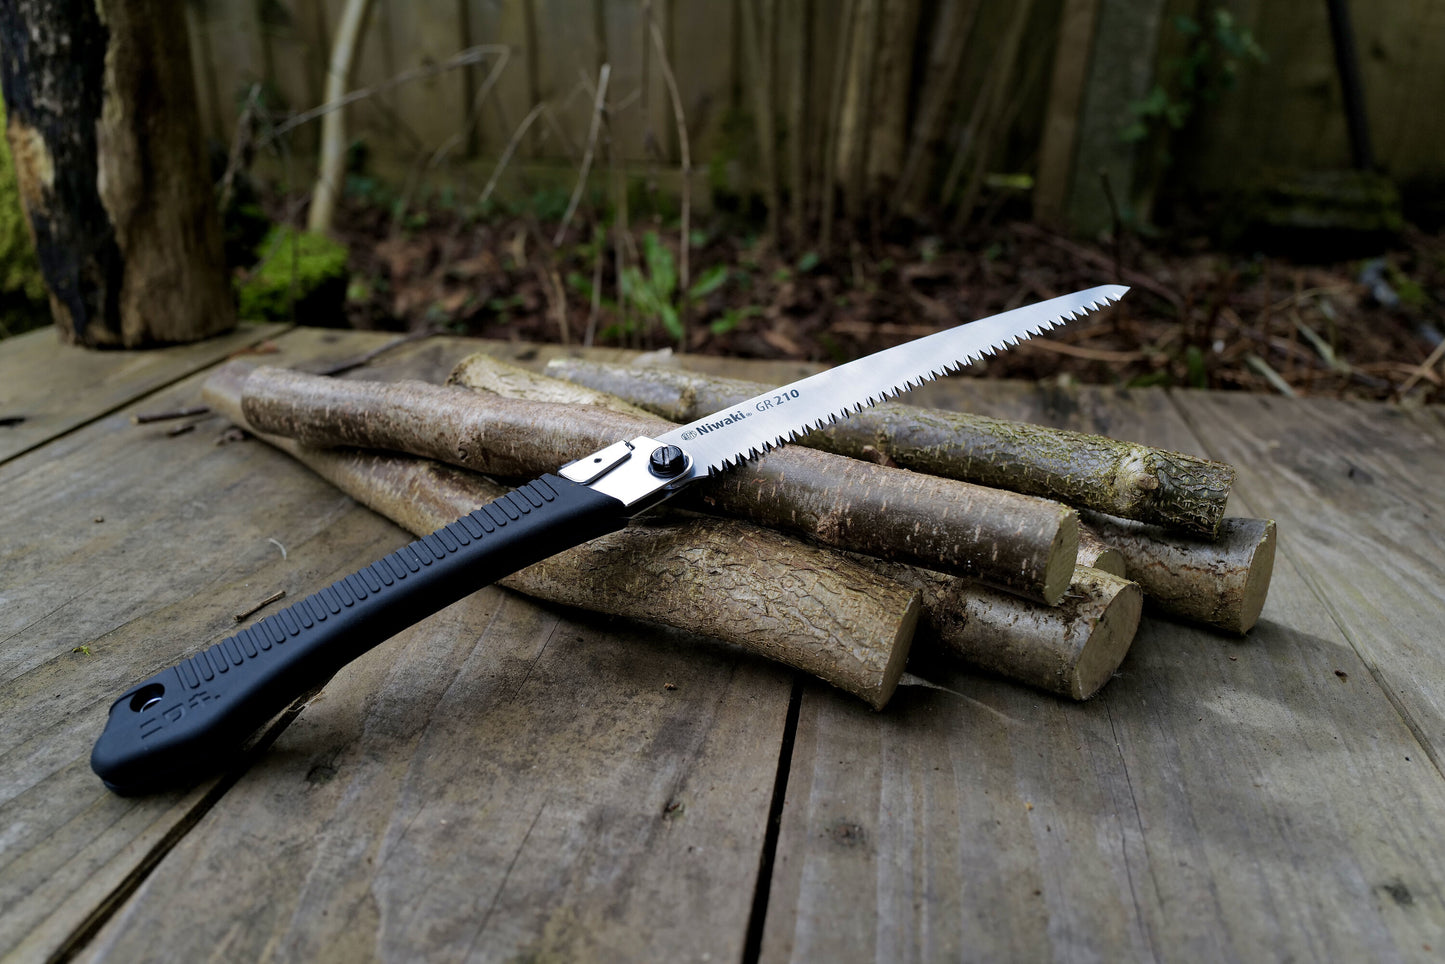 Pruning and trimming garden saw with rubber handle and SK-4 impact hardened steel blade from Japanese gardenware masters Niwaki.